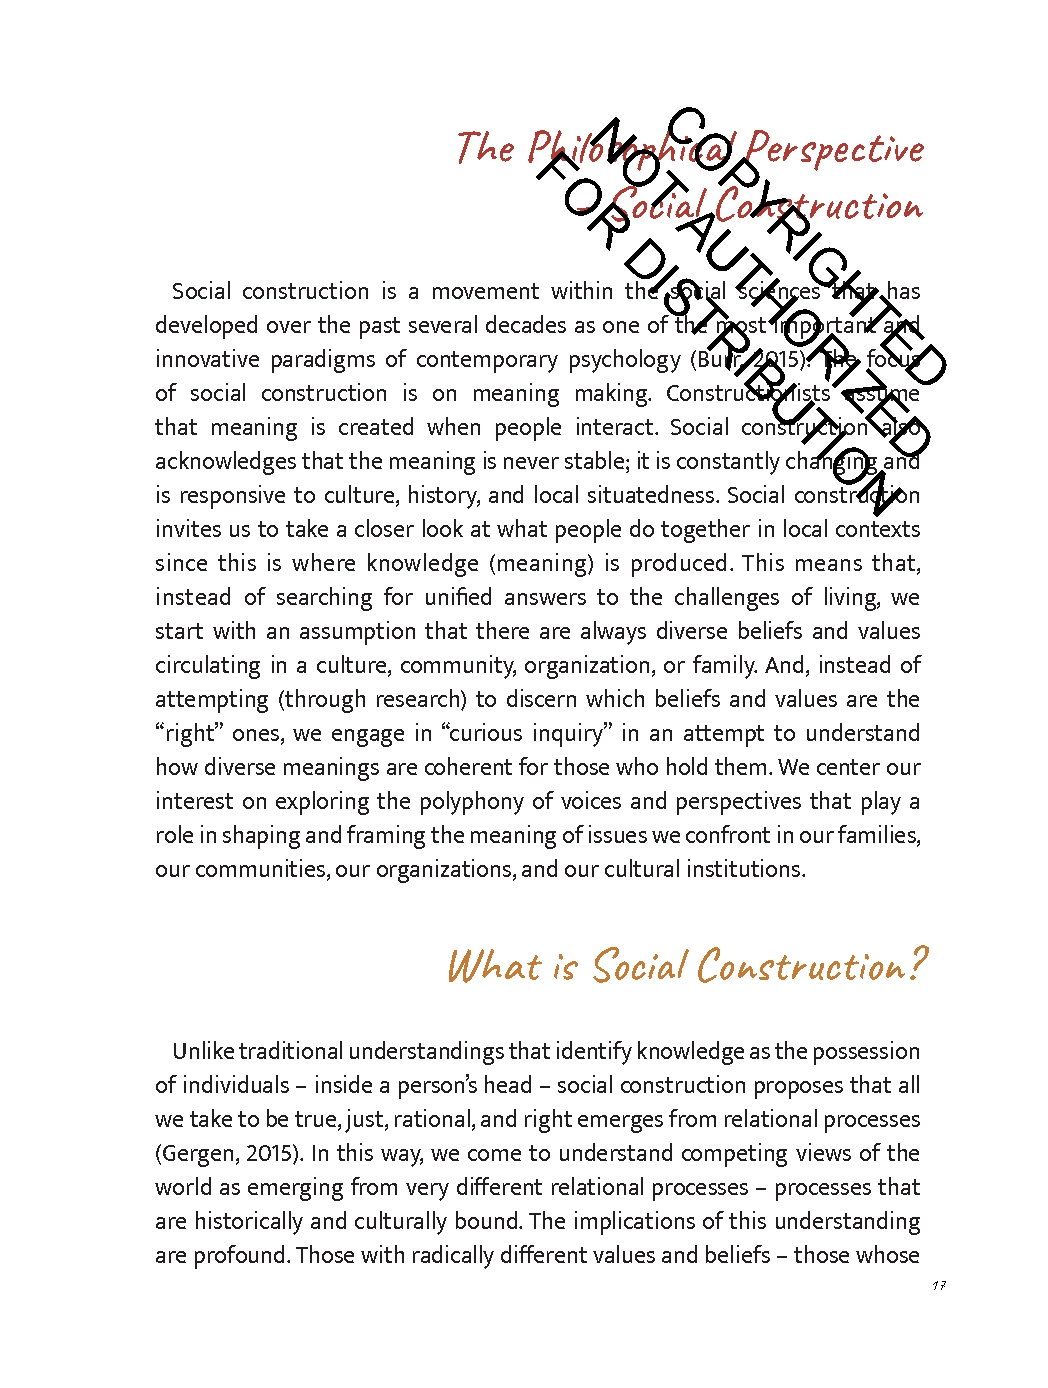 Design Thinking and Social Construction